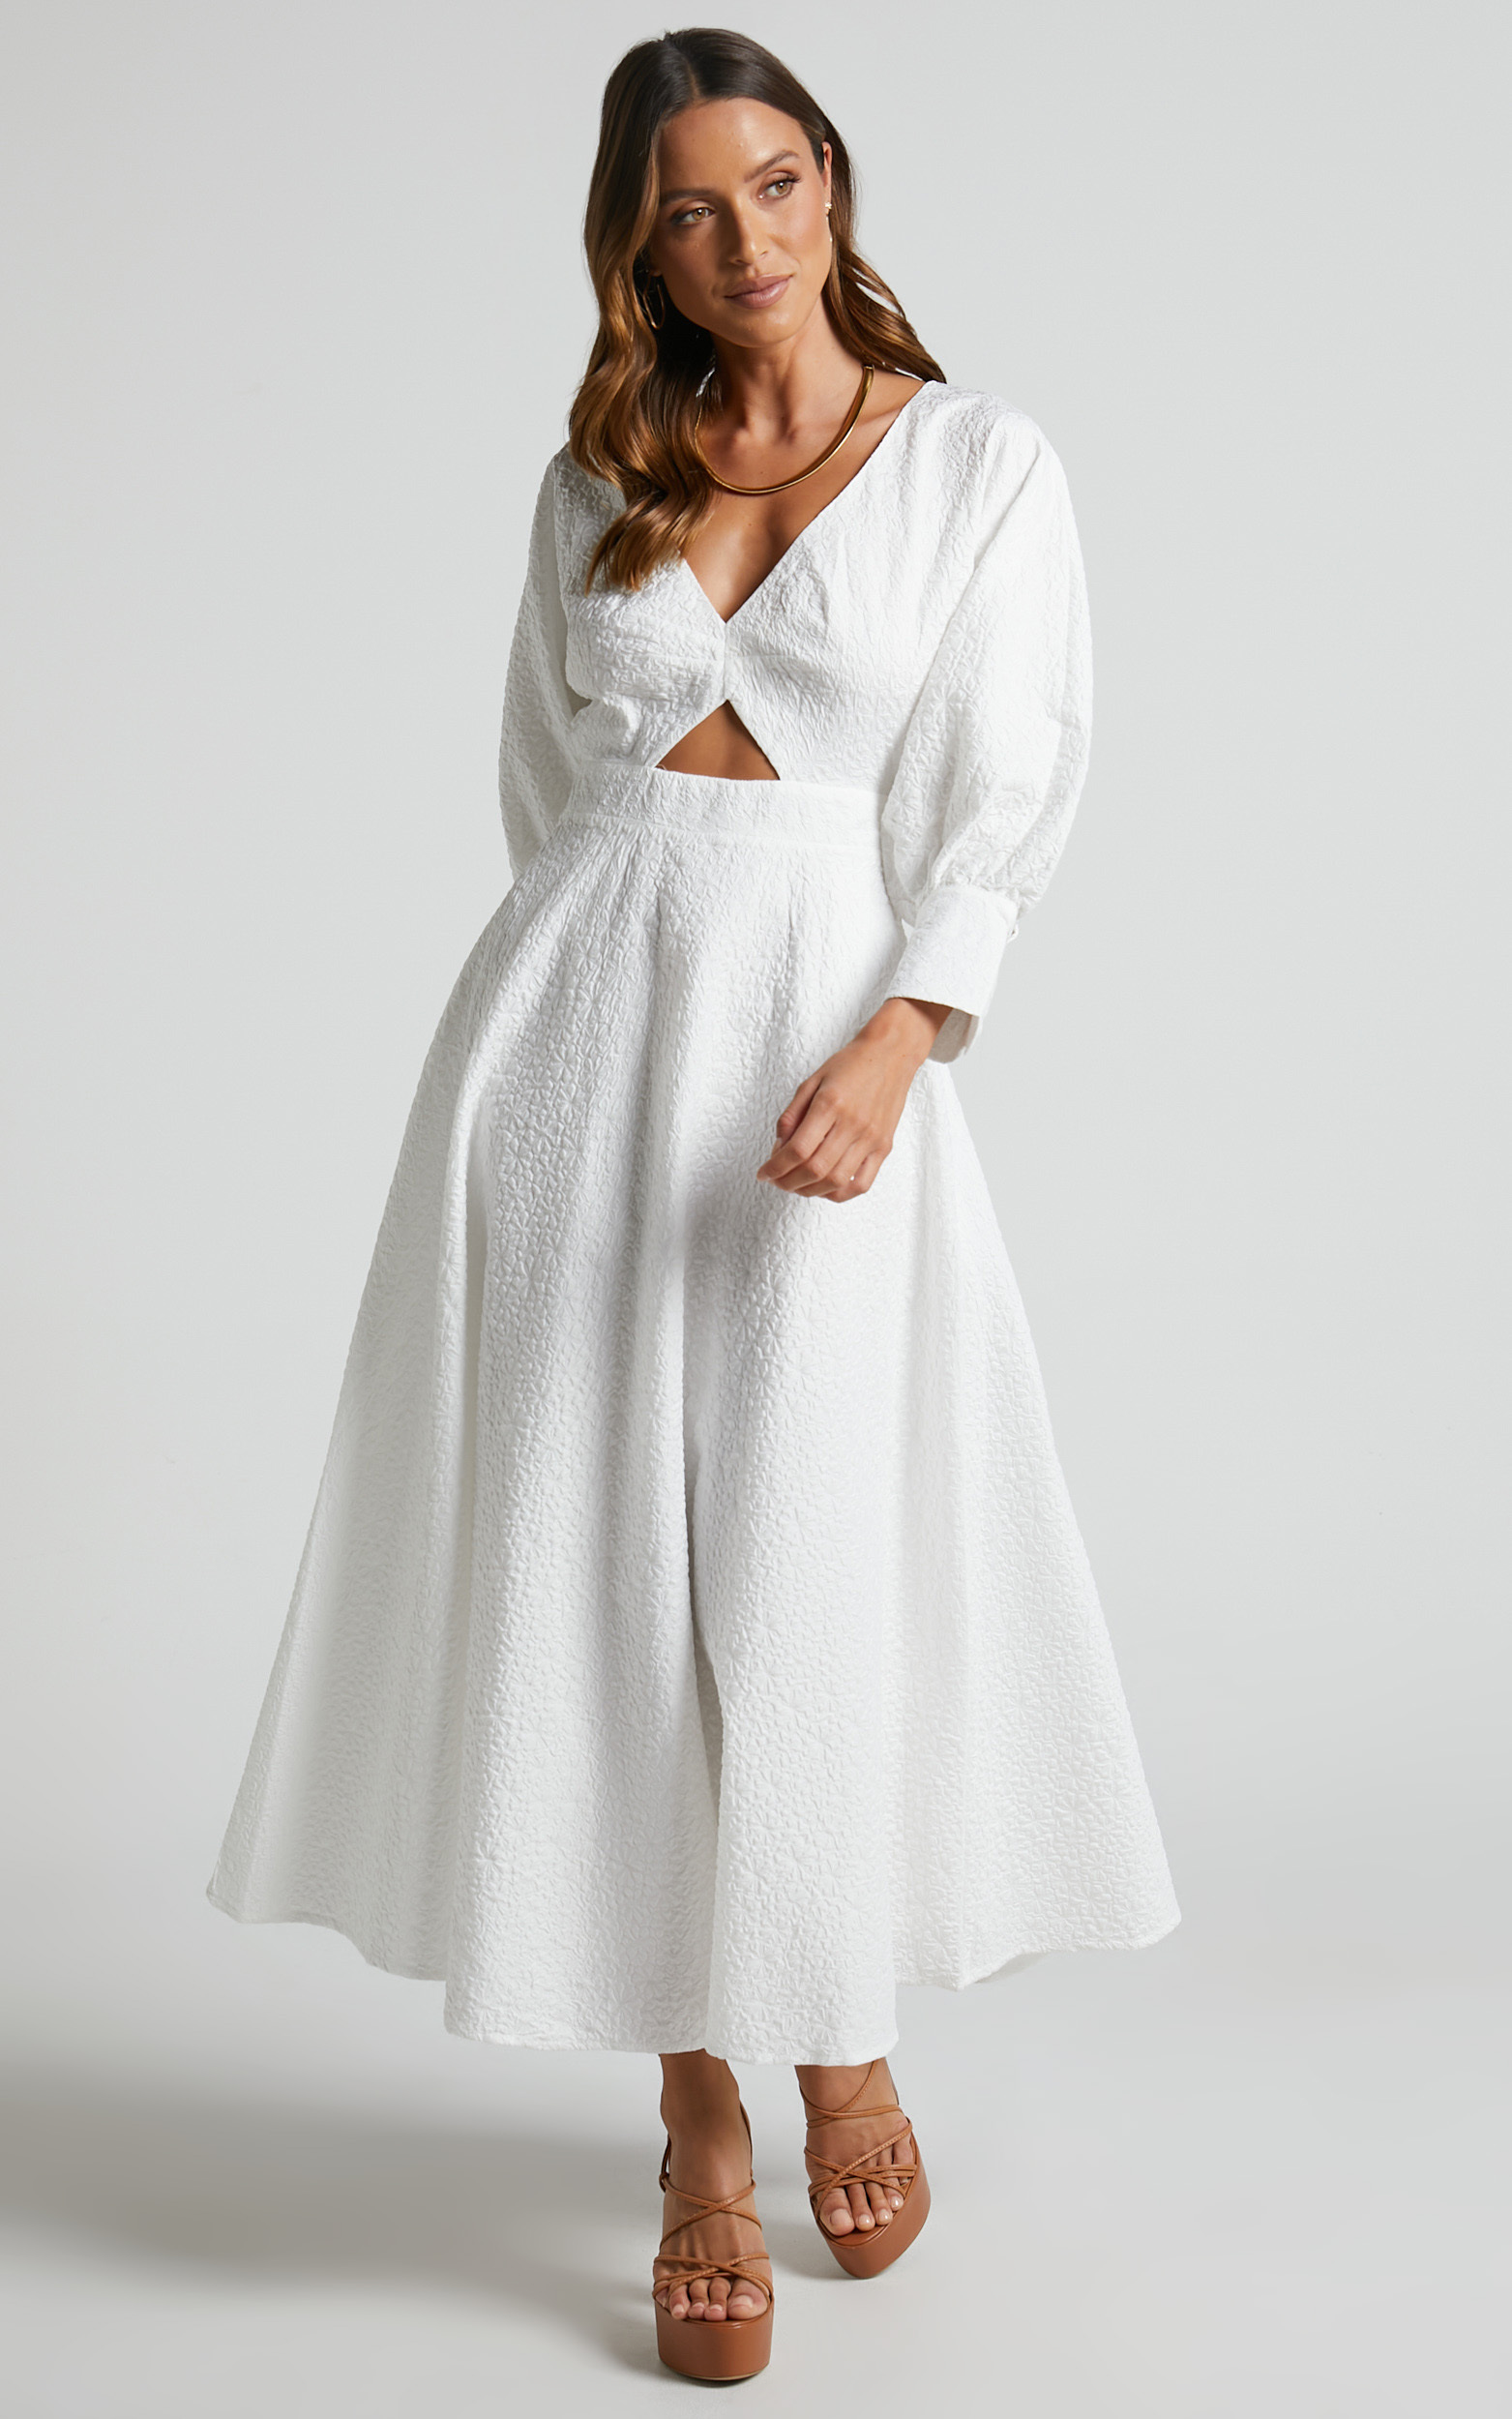 Ashtina Maxi Dress - V Neck Cut Out Puff Sleeve Dress in White - 04, WHT1, hi-res image number null